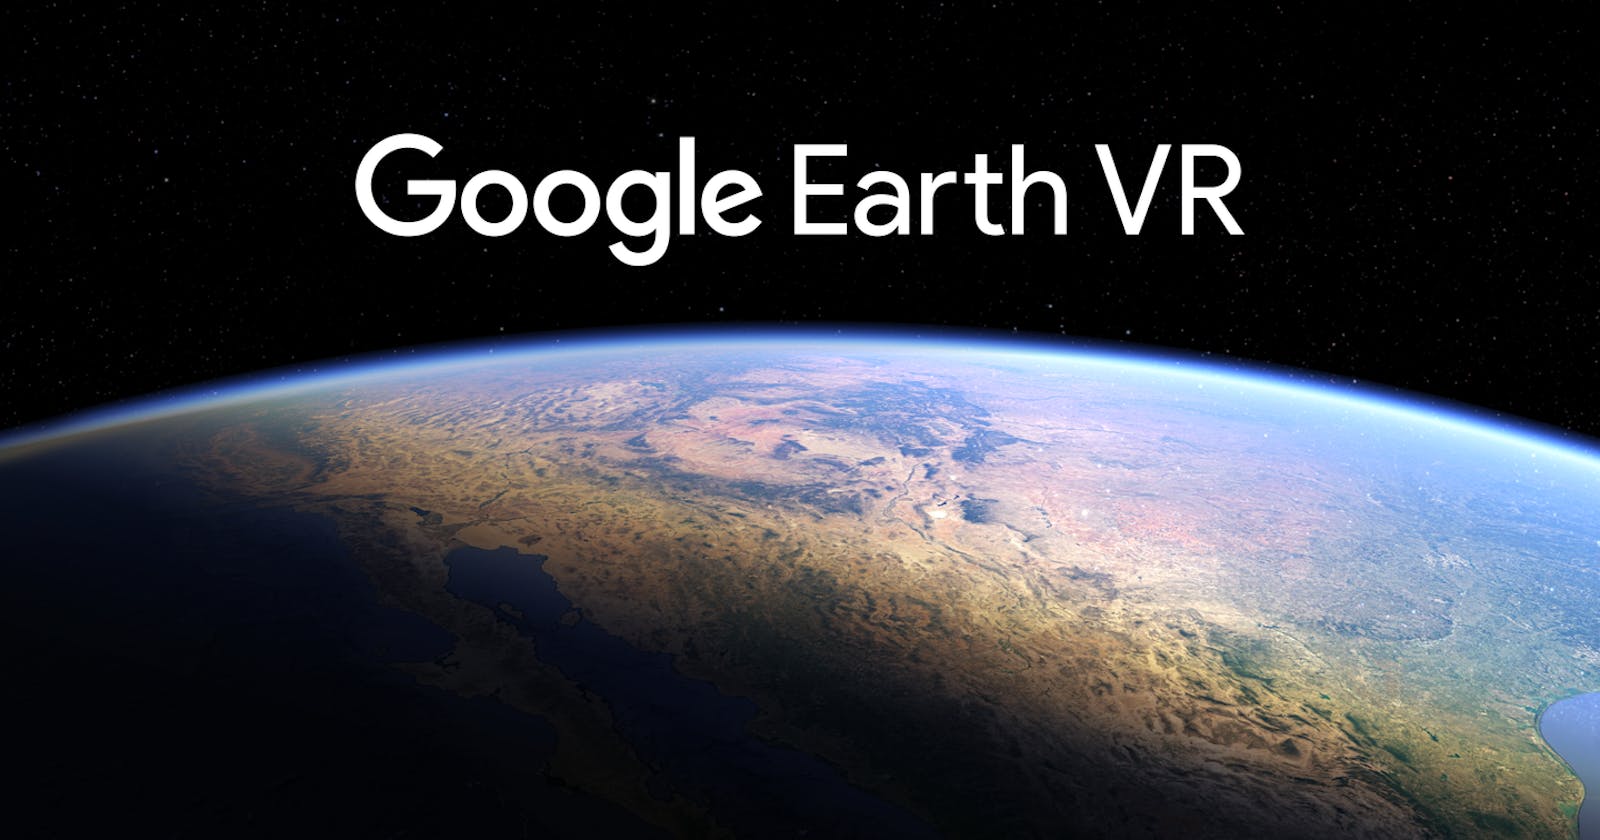 Search, explore, and more with Google Earth VR